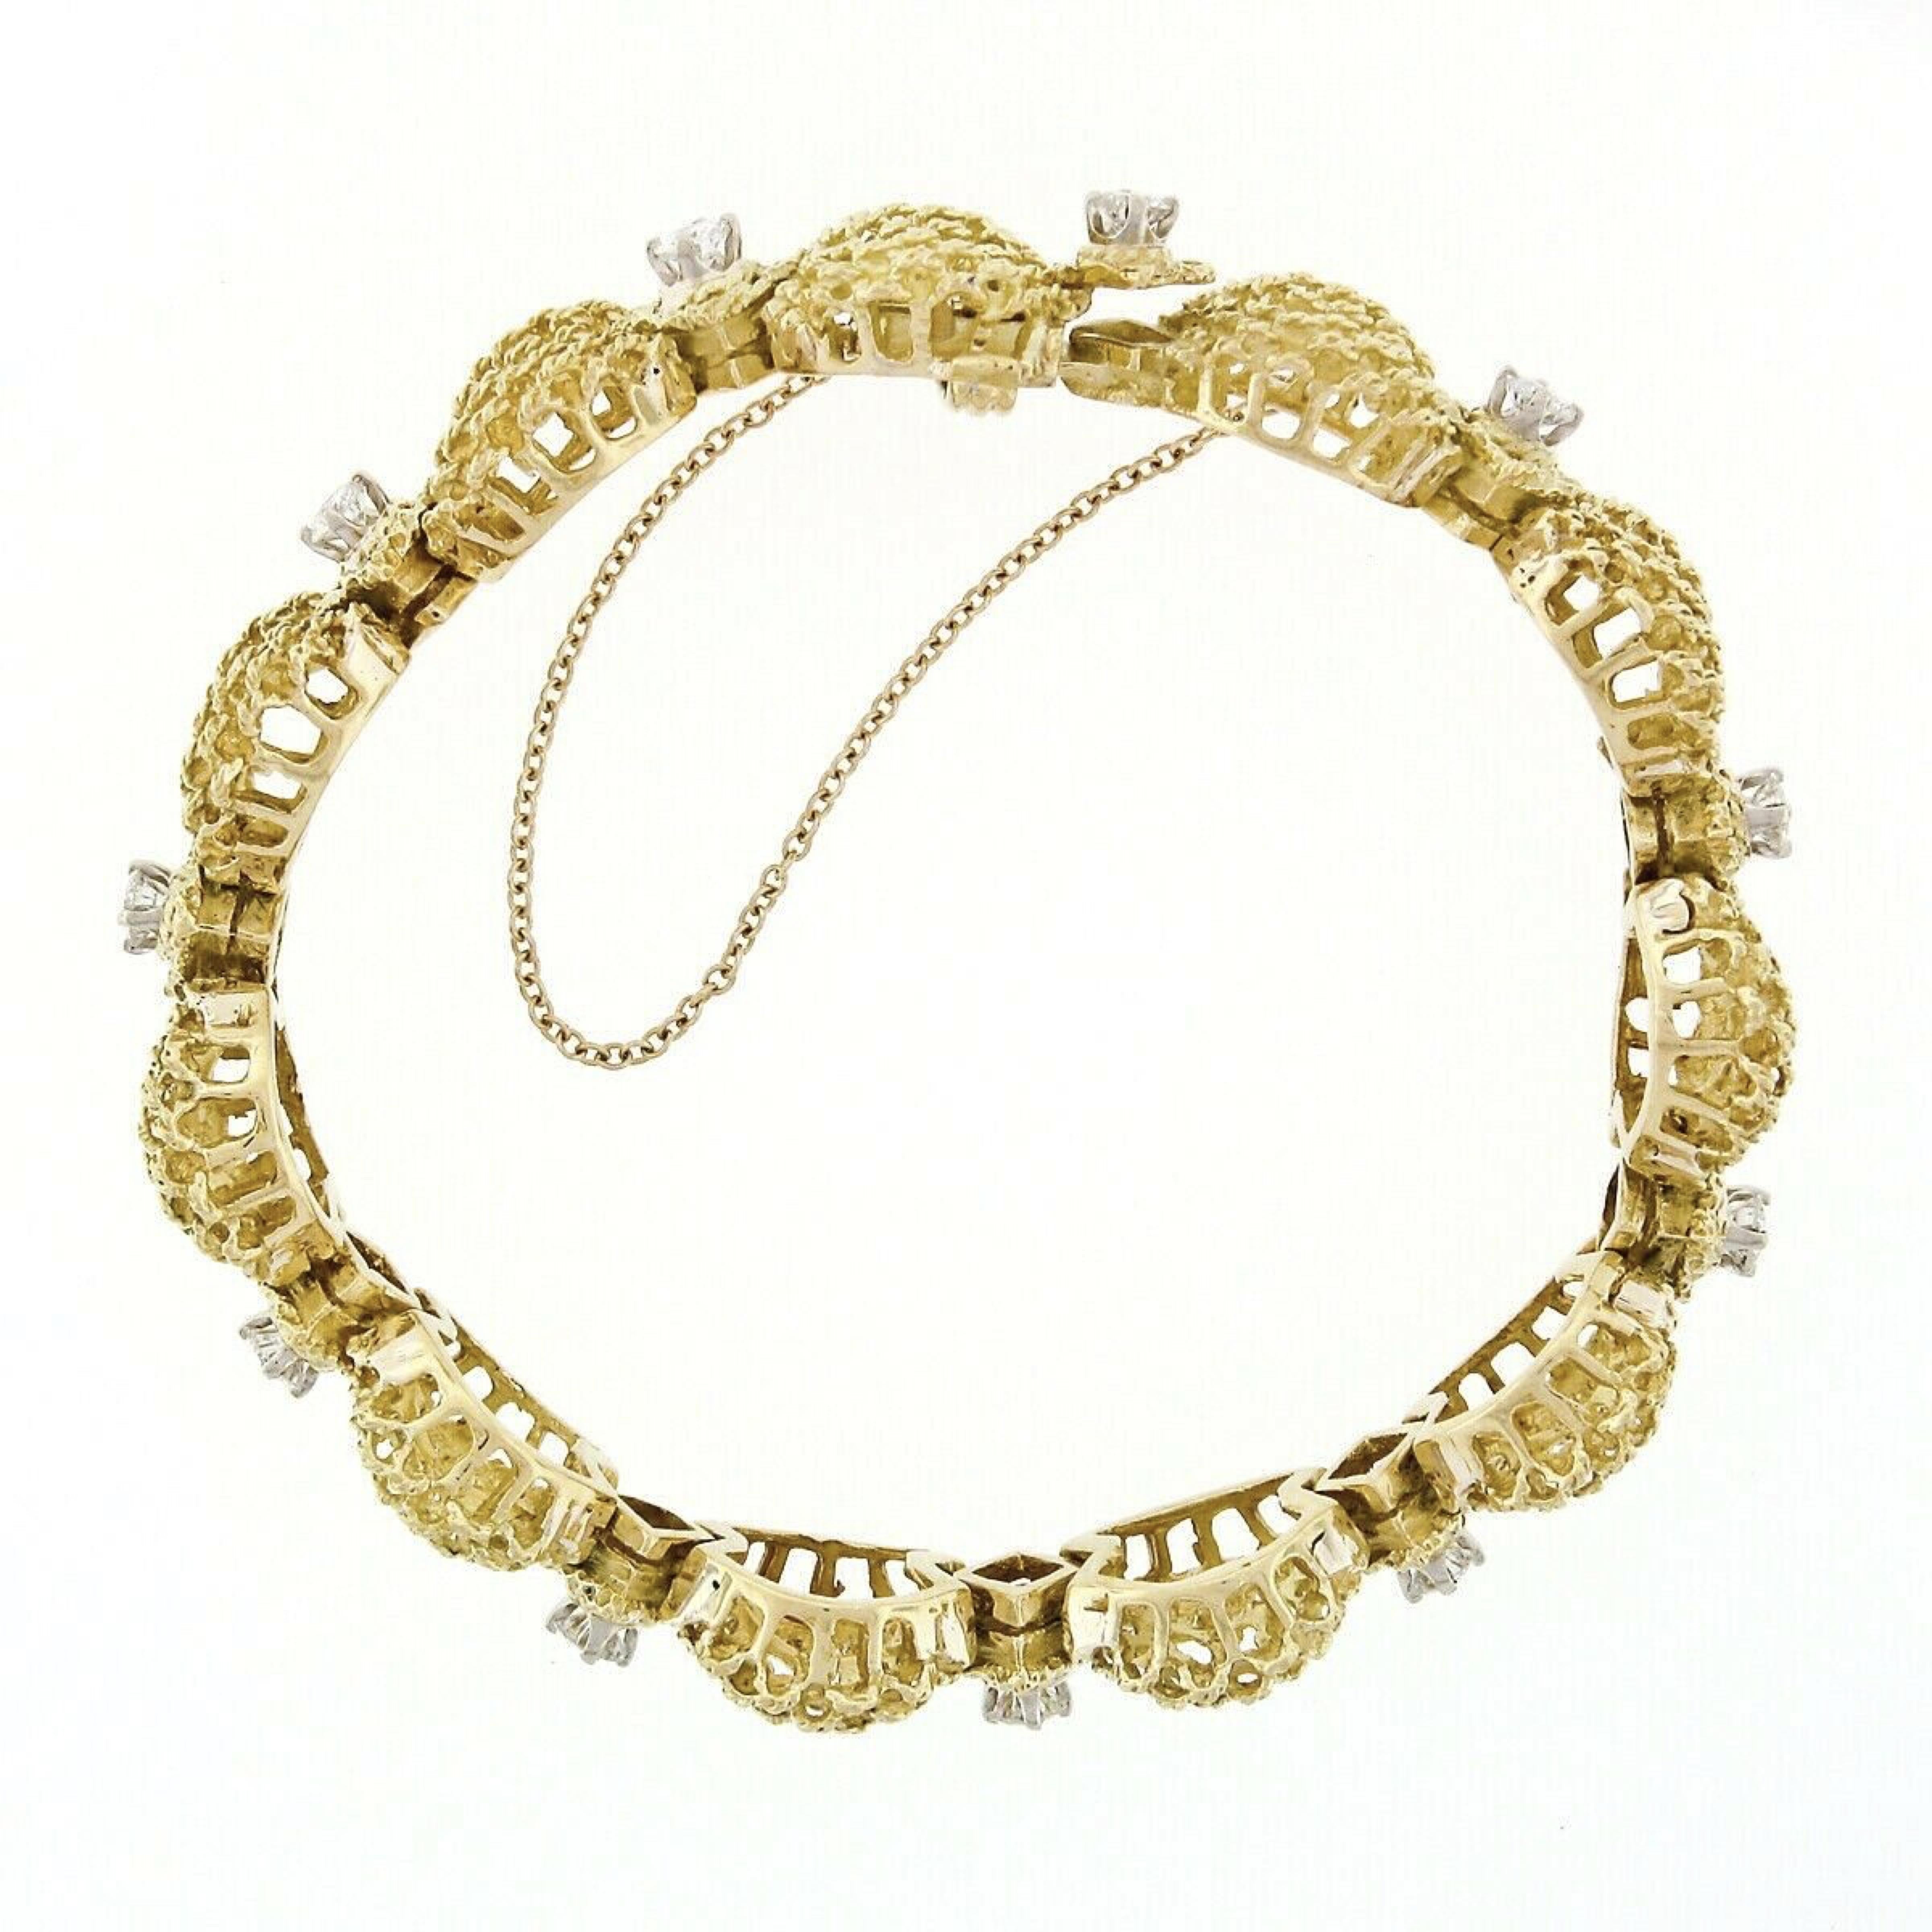 Vintage 18k Gold 1.51ct Diamond Twisted Wire Open Puffed Link Statement Bracelet For Sale 2